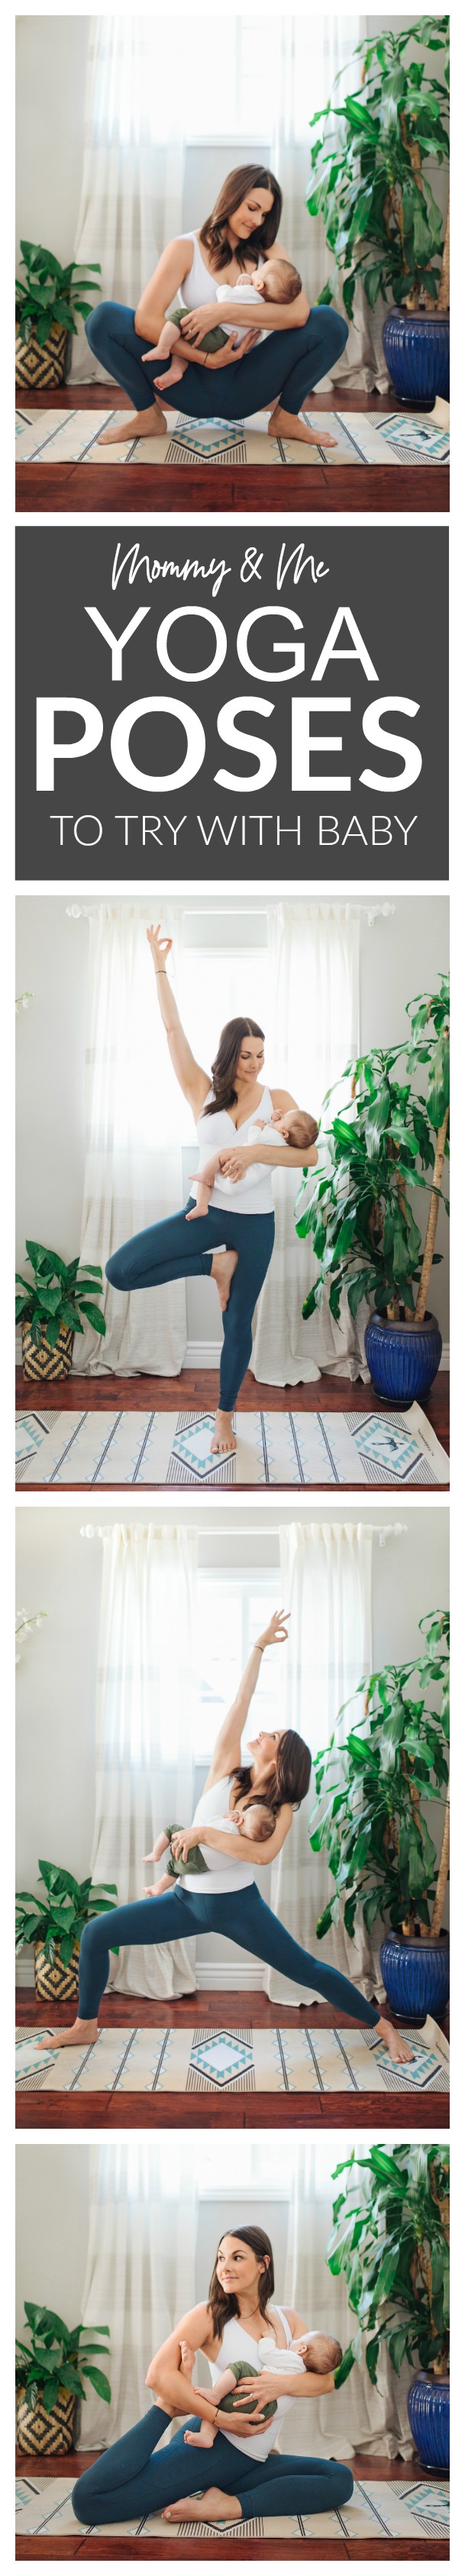 Mommy and me Yoga Poses - 6 yoga poses to try with baby!